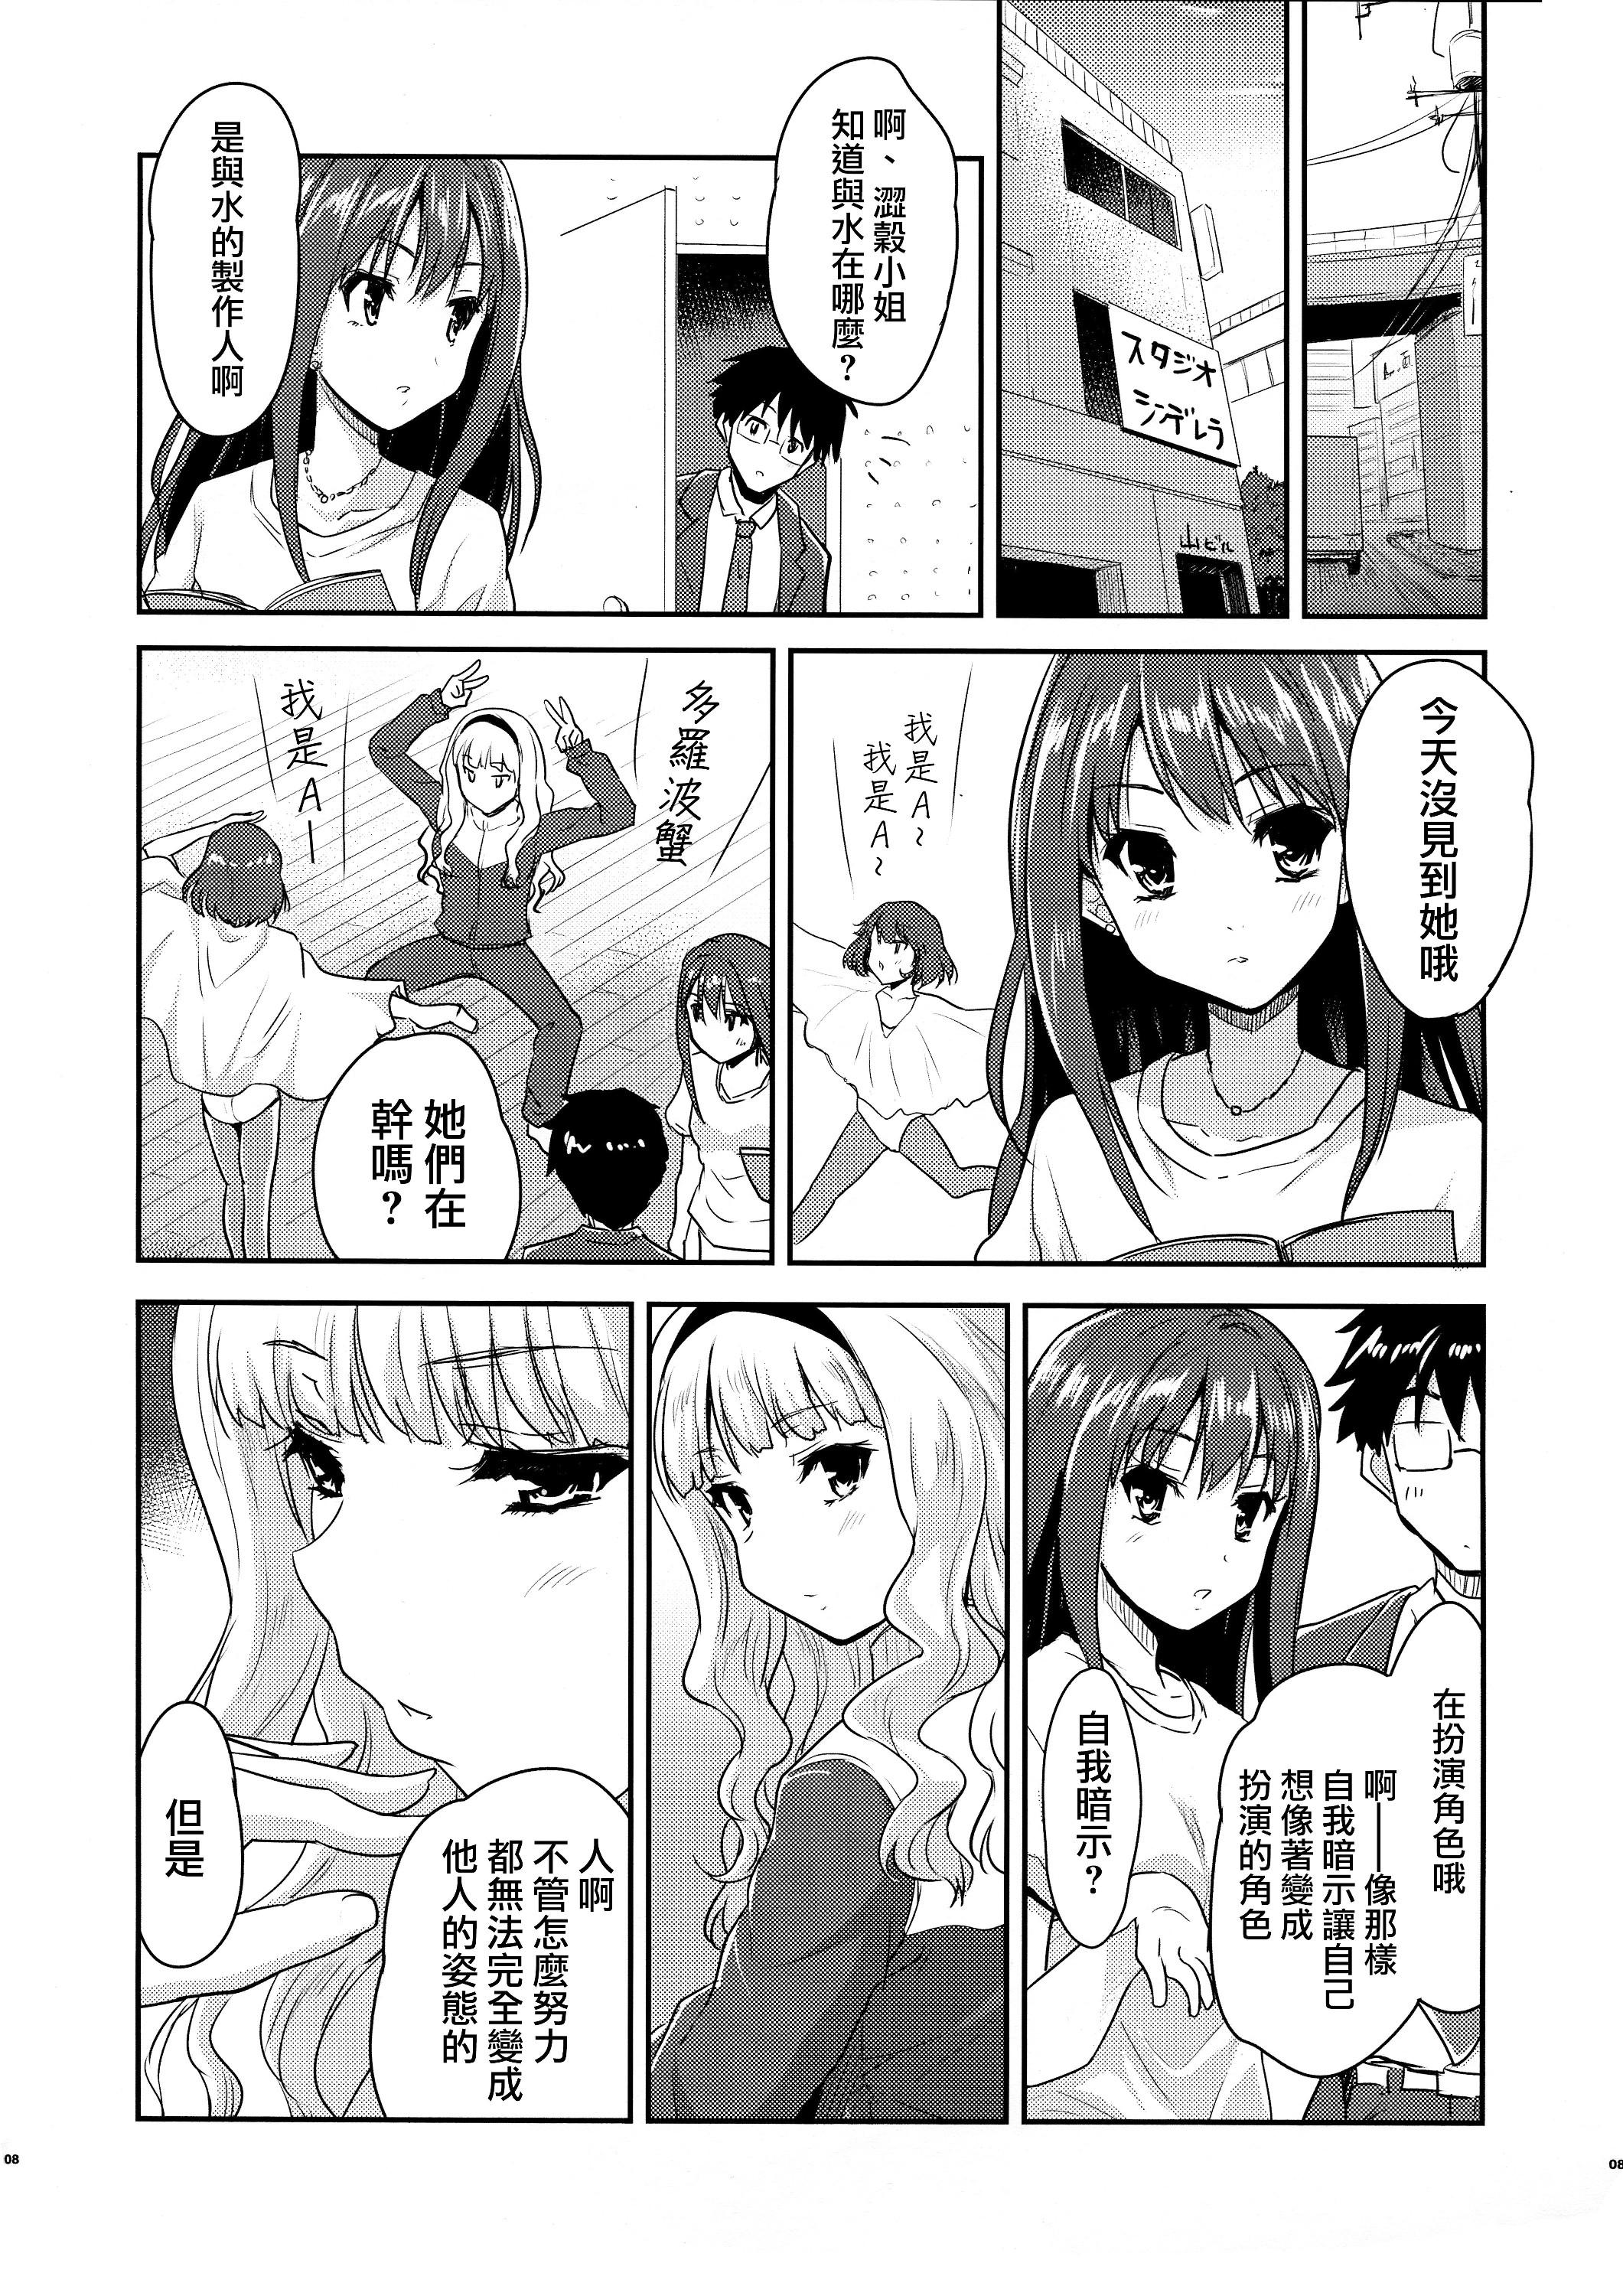 Relax CAWAWA - The idolmaster Family Sex - Page 8